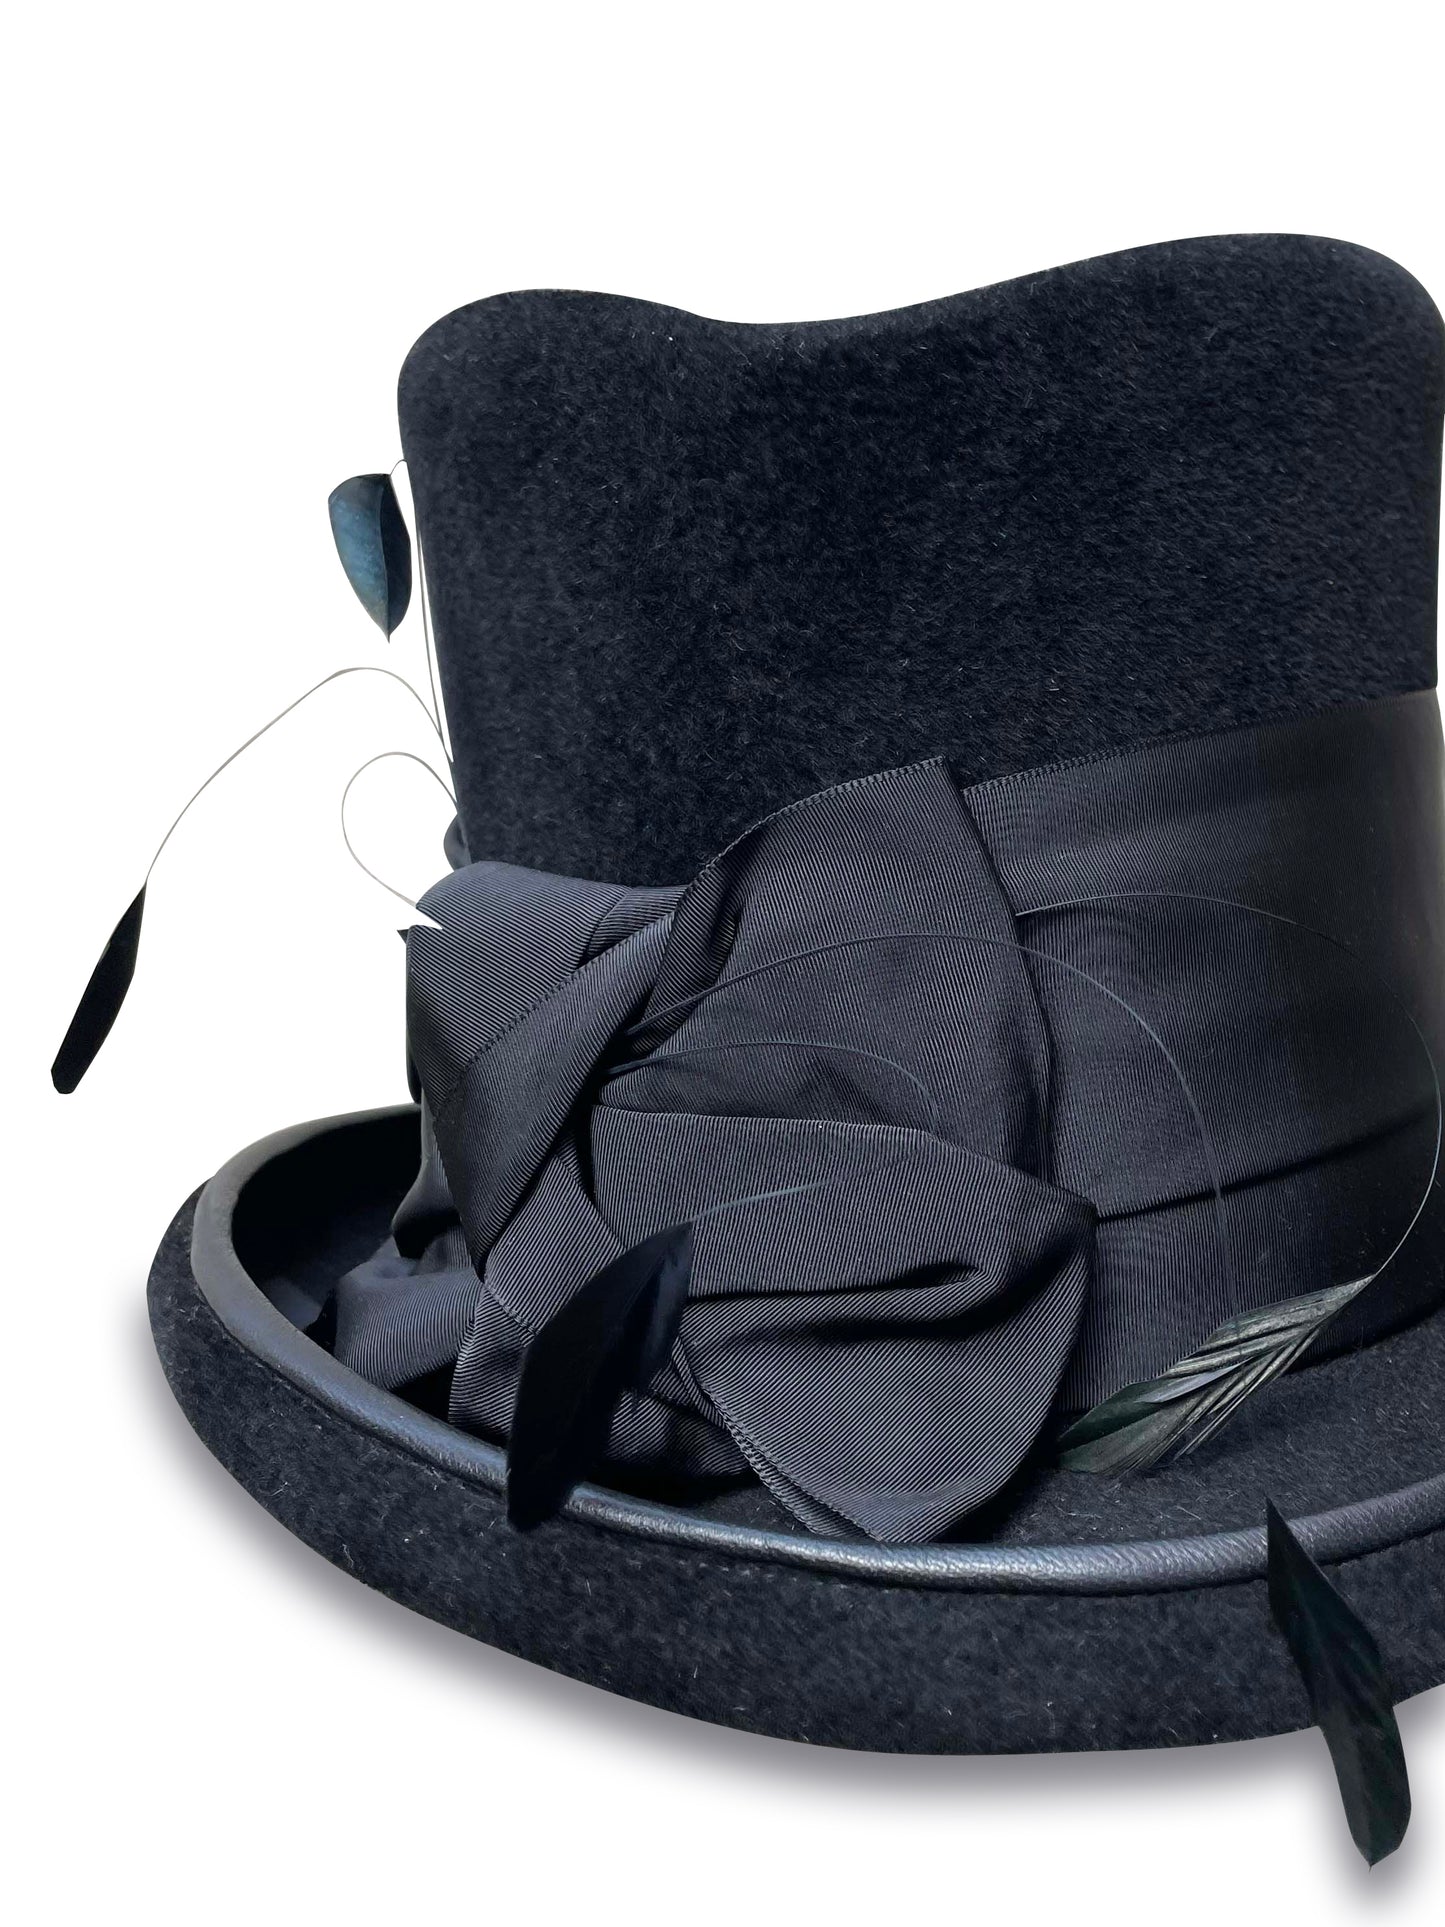 wide black ribbon wraps around the base of this unique top hat